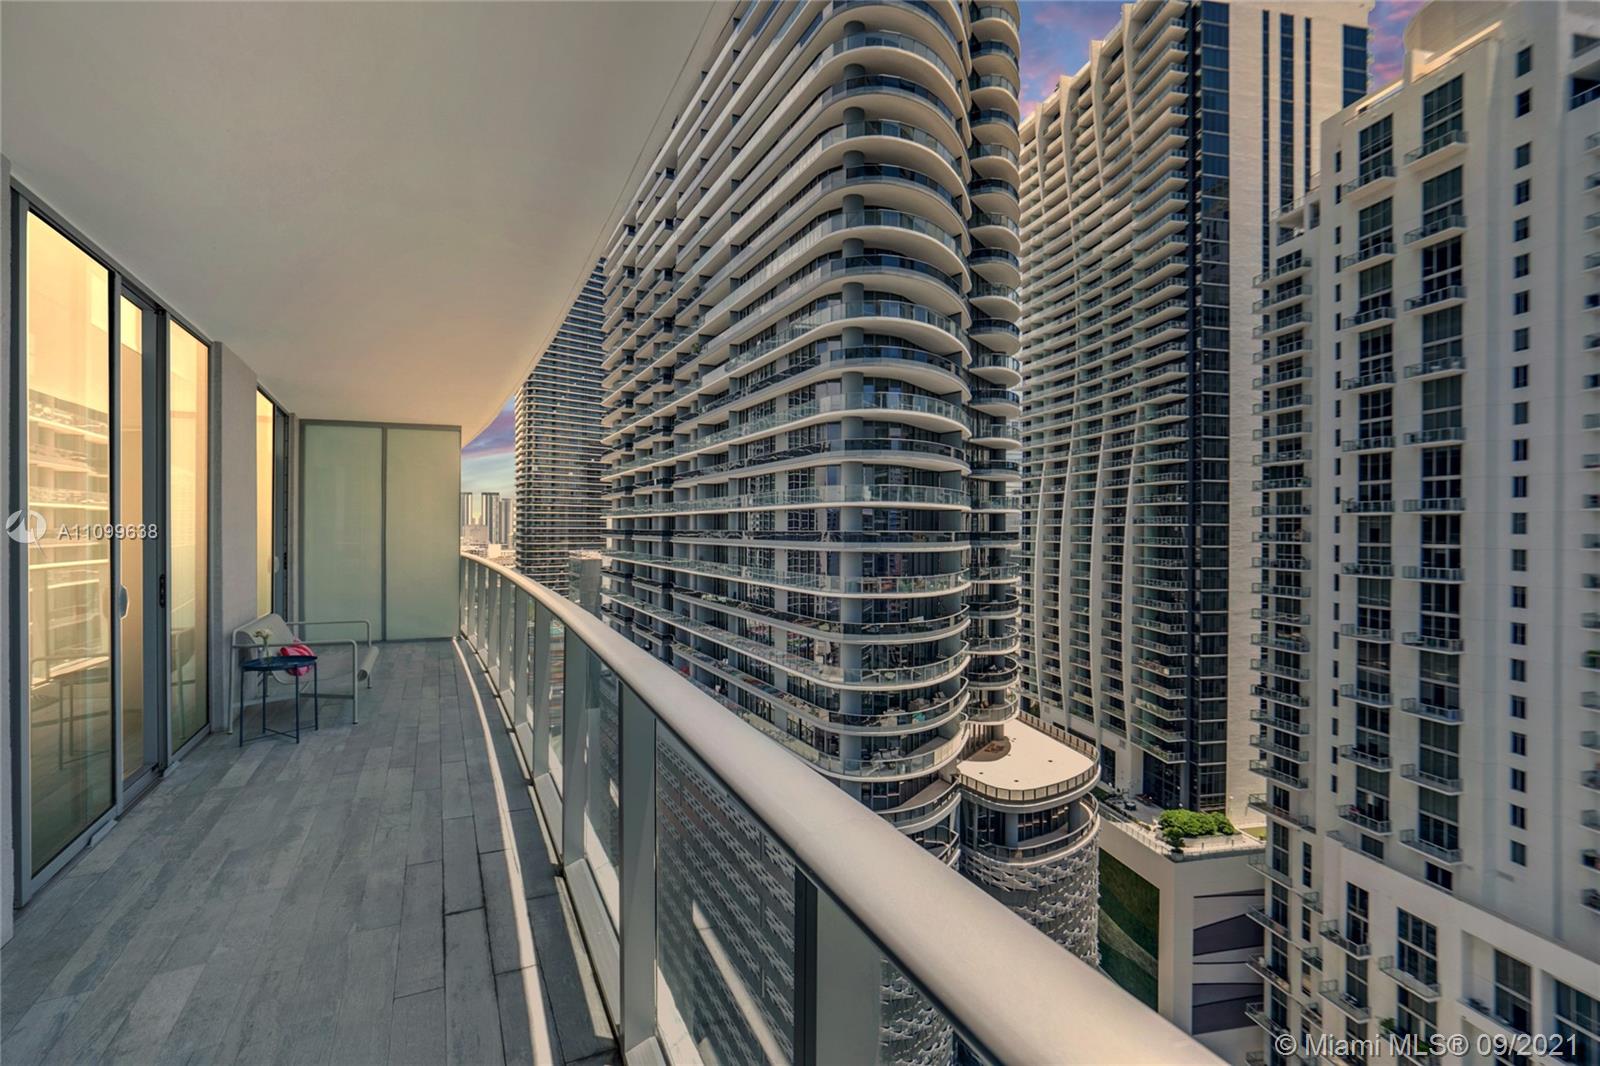 Two bedroom, two bathroom  + DEN unit with views to Brickell and Biscayne Bay. Featuring marble flooring throughout the entire unit and Italian kitchen. Central location, many amenities including party rooms, rooftop pool overlooking Miami, gym, children's playroom theater and more. Unit is available from 1/15/22-12/12/2022.